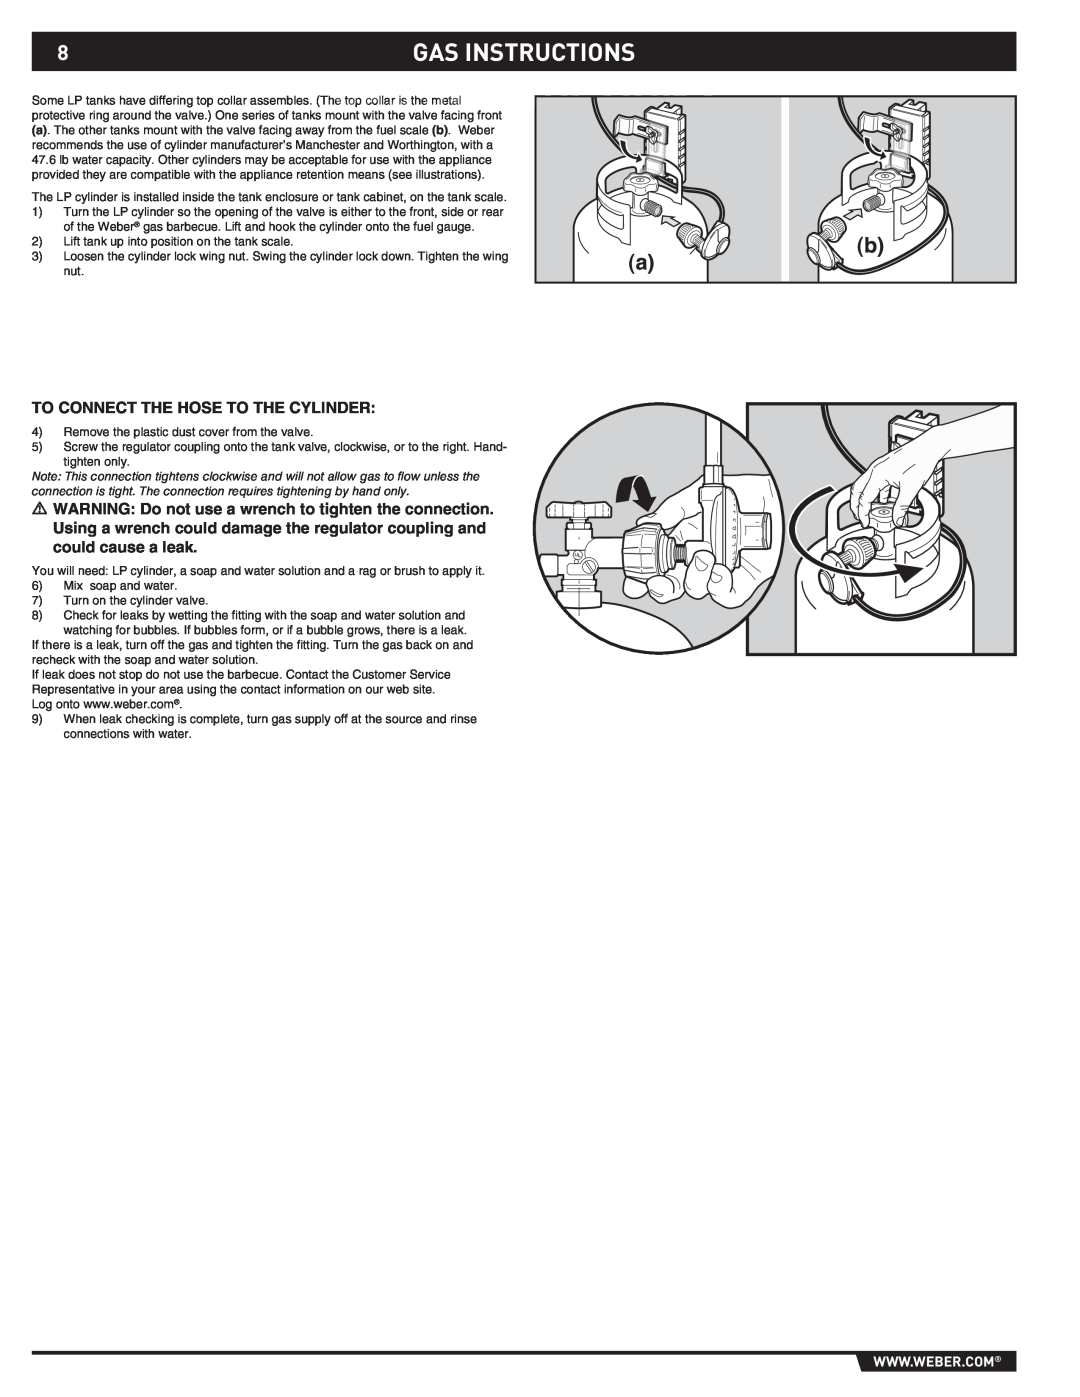 Weber S-460 manual Gas Instructions, To Connect The Hose To The Cylinder 